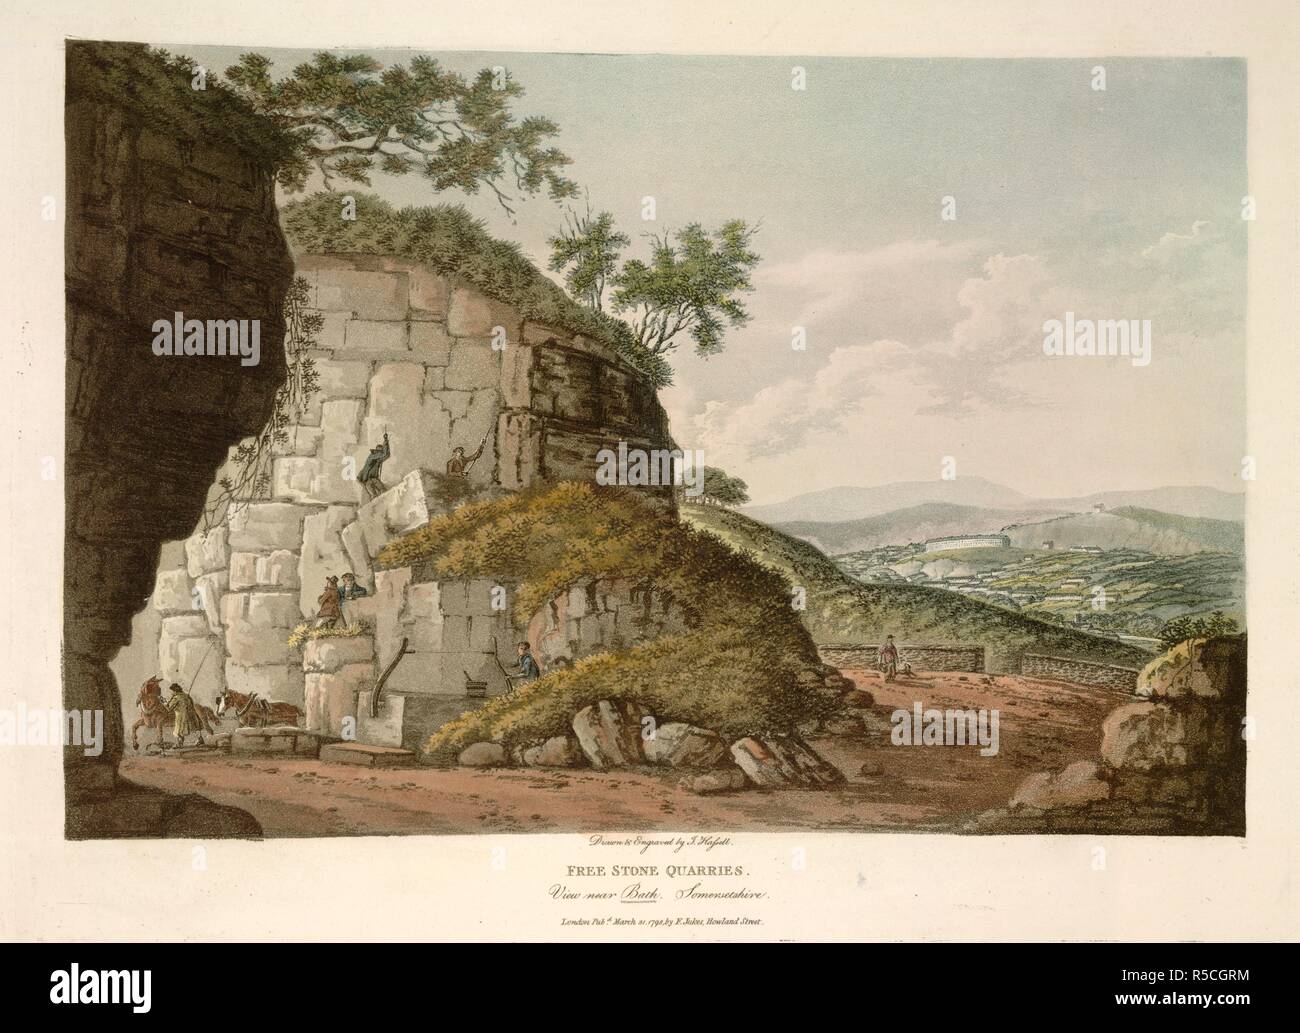 Free Stone Quarries. Free Stone Quarries, a View near Bath: by J. Hasse. 1798. Free Stone Quarries, view near Bath, Somersetshire.  Image taken from Free Stone Quarries, a View near Bath: by J. Hassel.  Originally published/produced in 1798. . Source: Maps.K.Top.37.30.b,. Language: English. Author: Hassell, John. Stock Photo